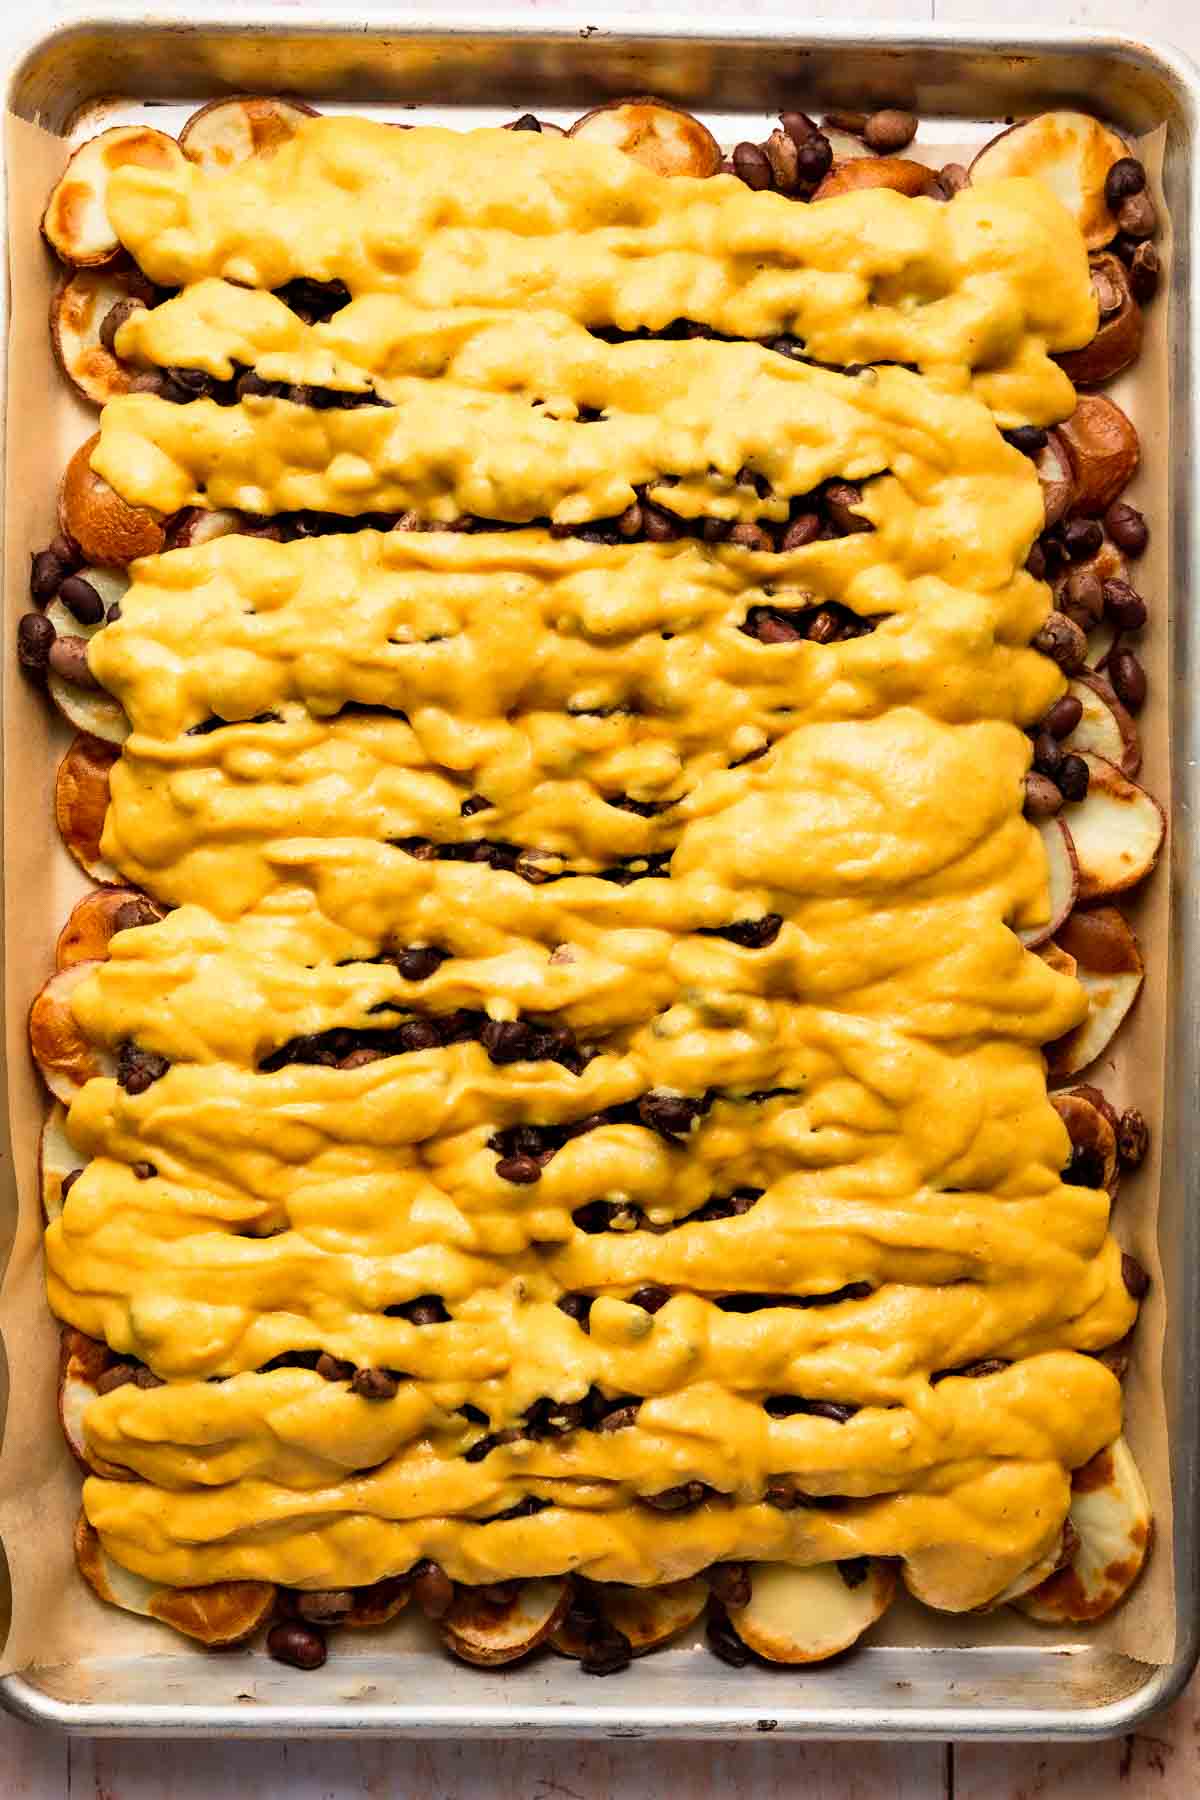 Plant-based queso sauce poured over nachos on a baking sheet.